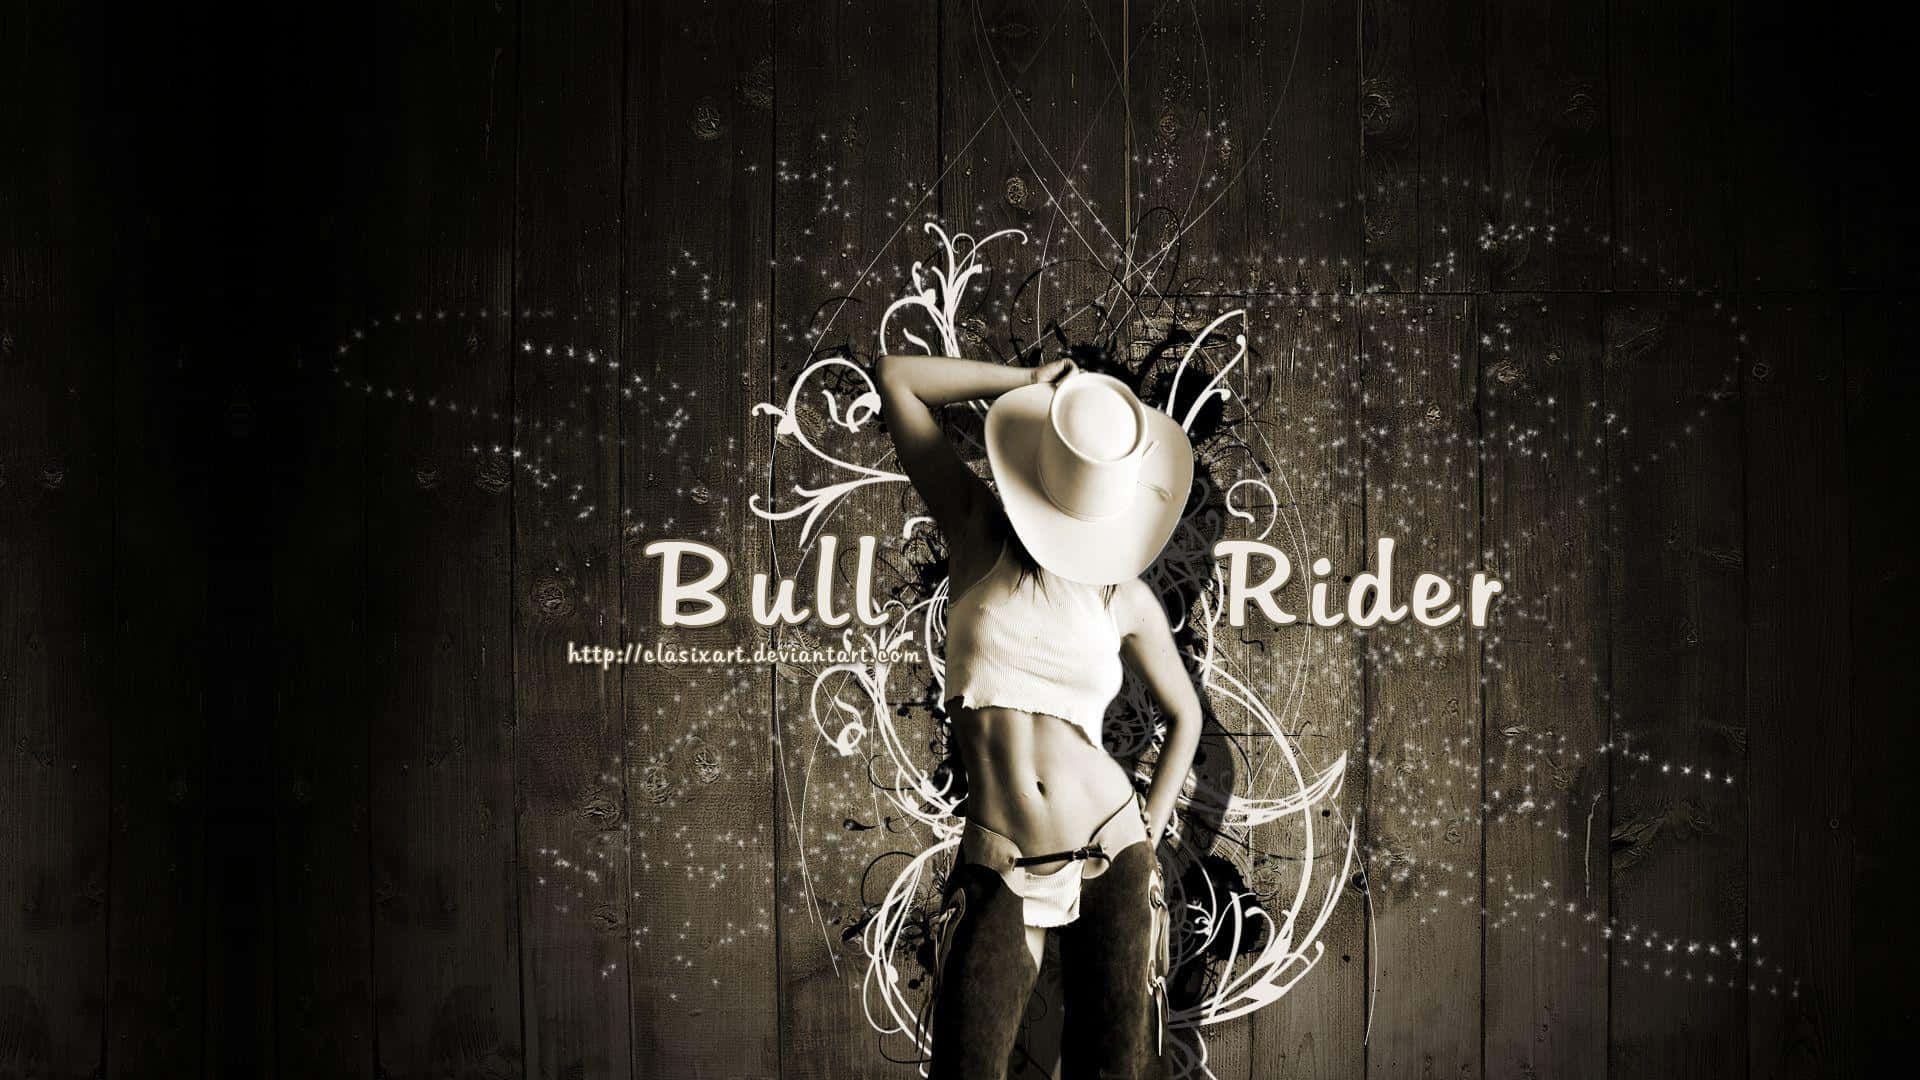 Take the challenge and try your luck in Bull Riding